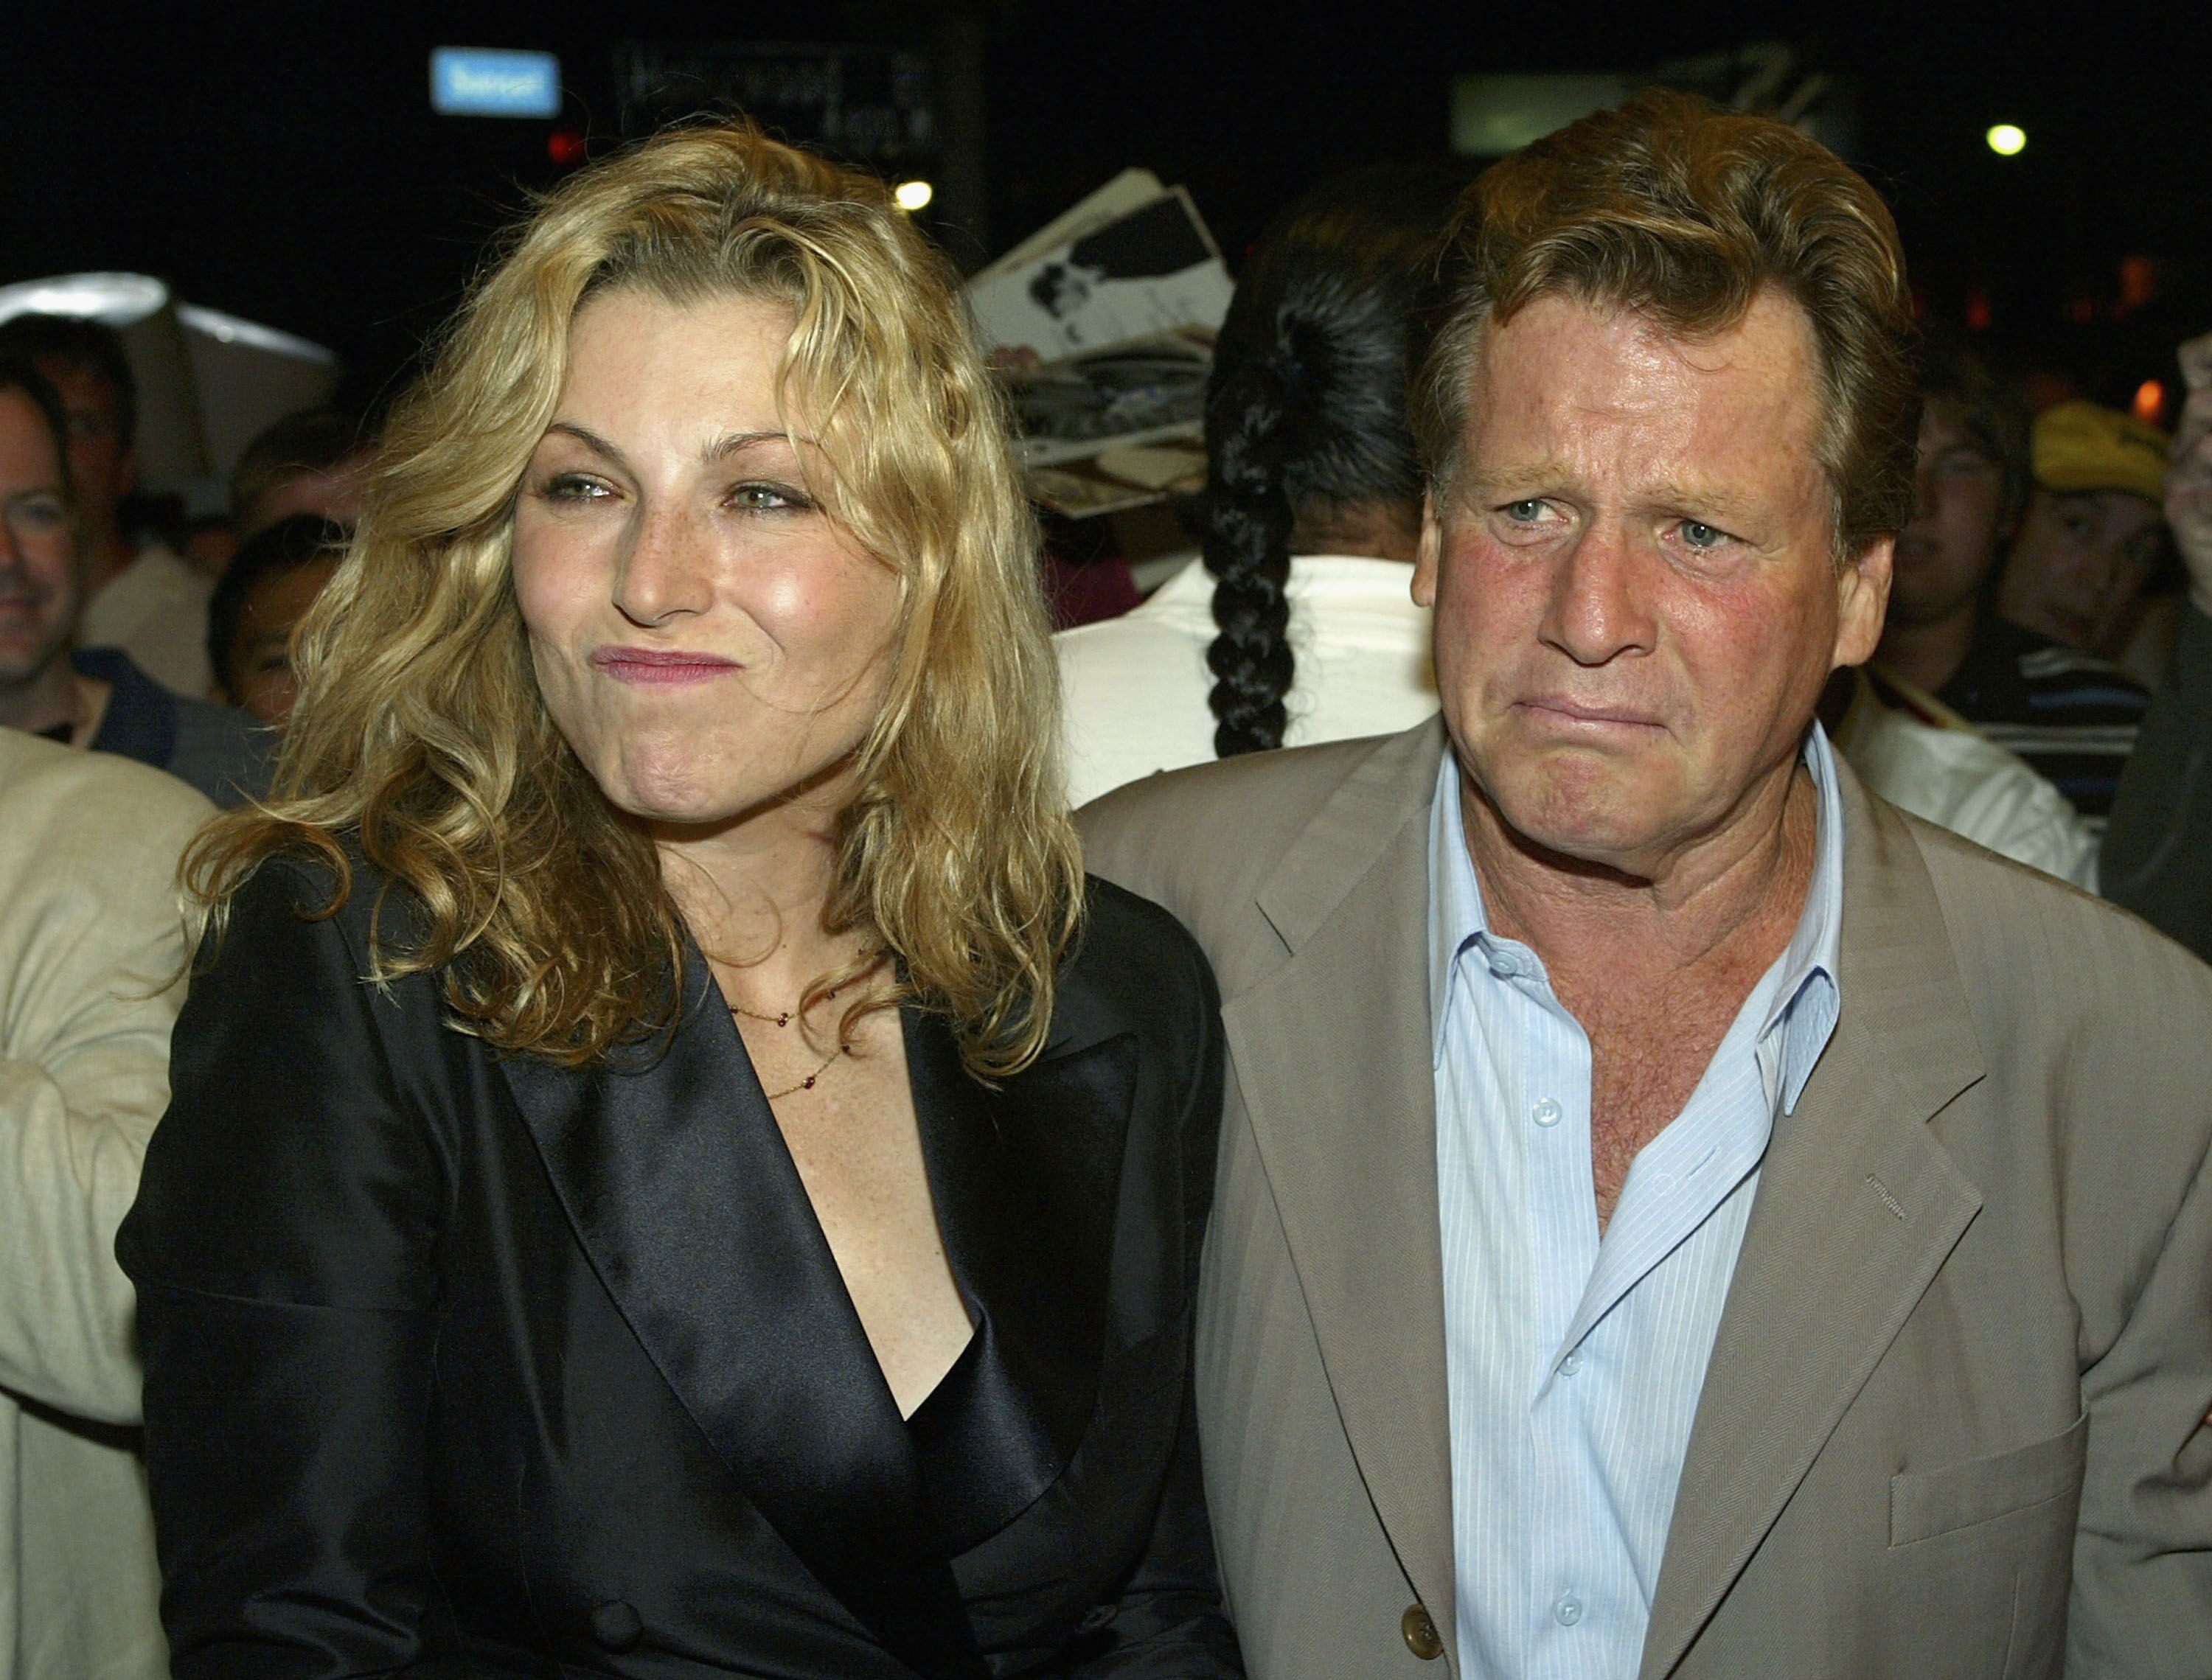 Tatum O'Neal and her father, Ryan O'Neal, at the 30th anniversary screening of "Paper Moon" on August 21, 2003. | Source: Getty Images